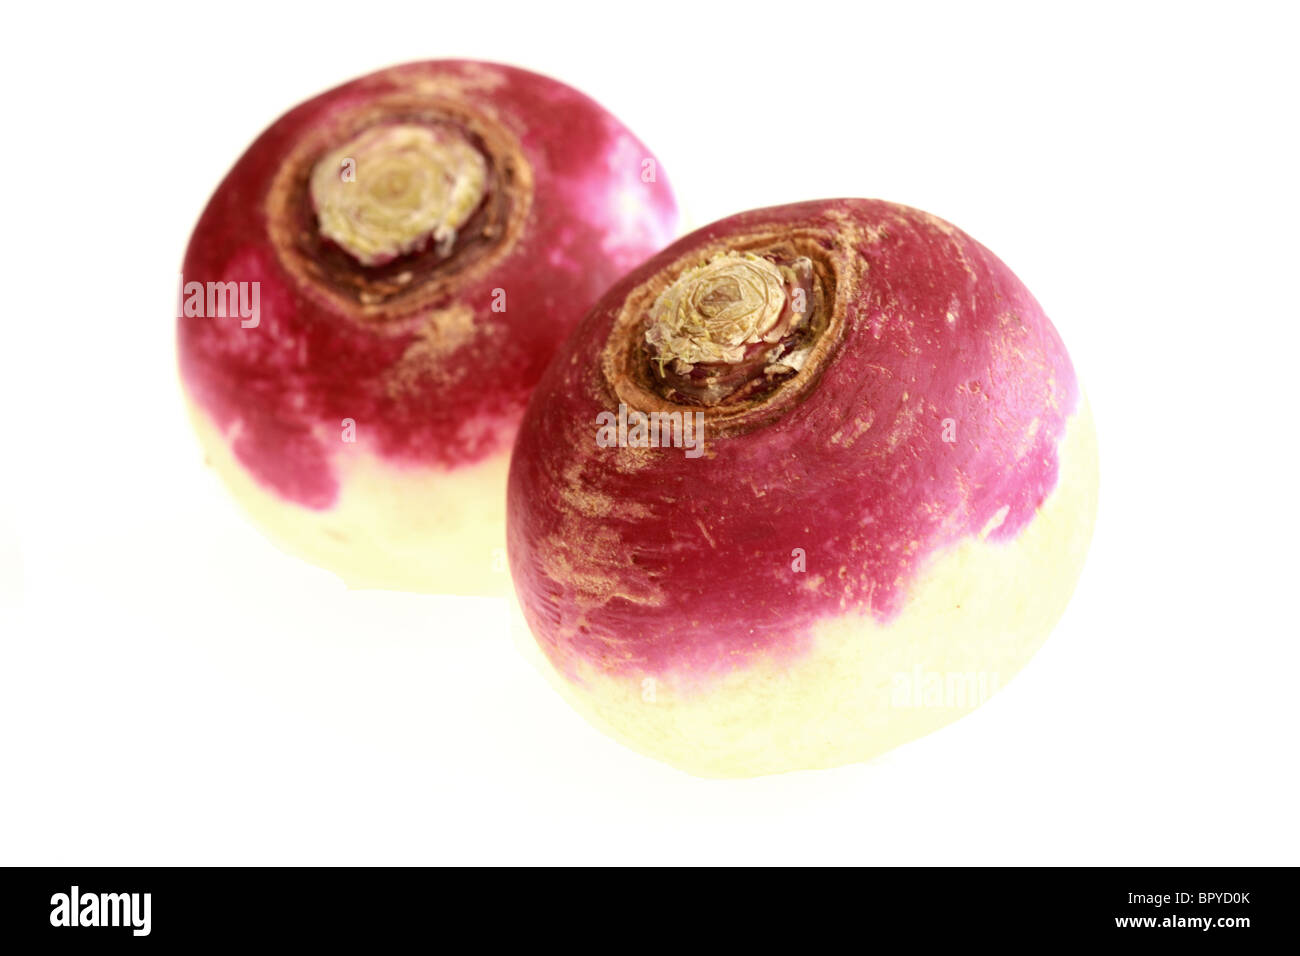 Fresh Healthy Raw Uncooked Turnips Against A White Background With A Clipping Path And No People Stock Photo